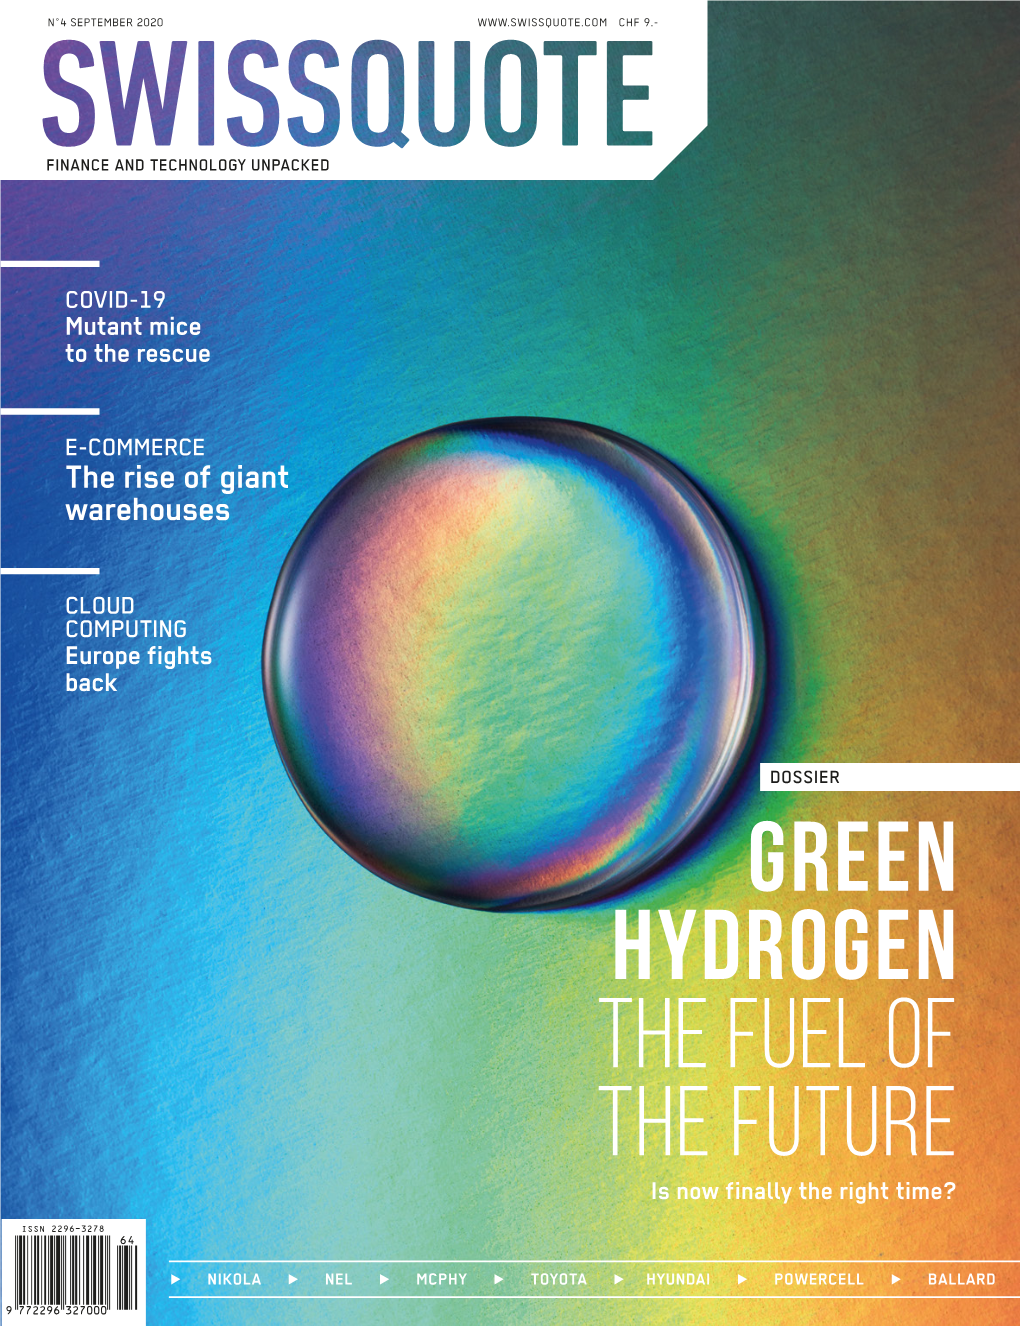 GREEN HYDROGEN the FUEL of the FUTURE Is Now Finally the Right Time?